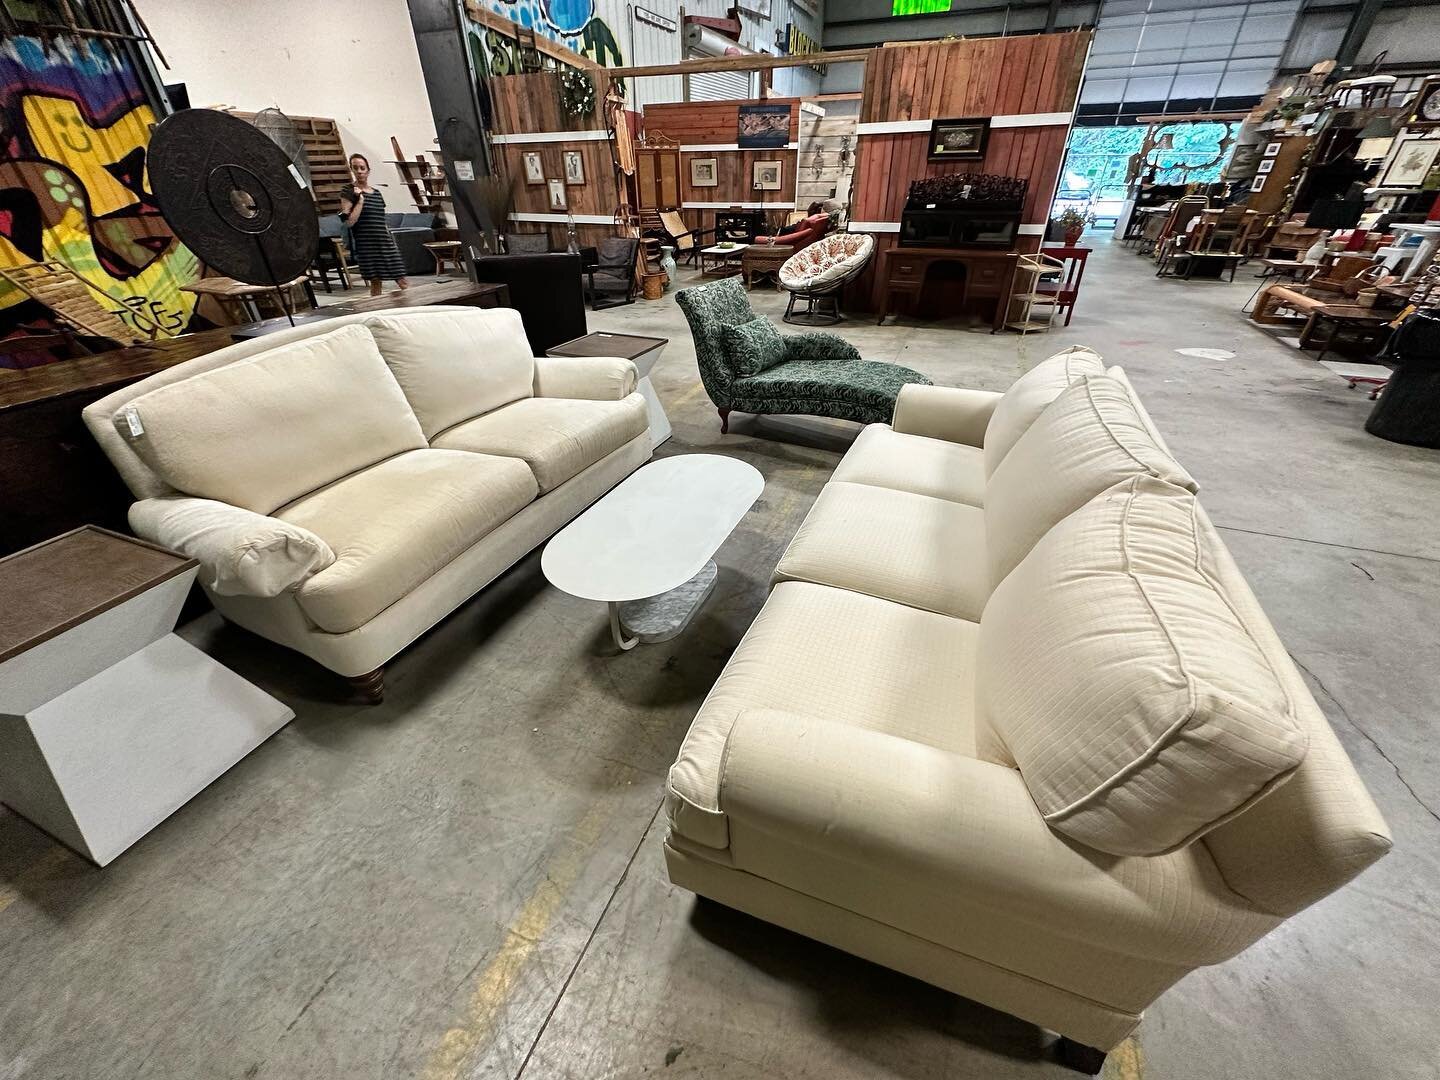 🚨New Inventory 🚨 We&rsquo;ve got something for everyone at TRS! Open 10-6, 7 days a week. #vintage #antique #midmod #midcentury #boho #shabbychic #ecofriendly #sustainable #wnc #asheville #smallbusiness #womanownedbusiness #reducereuserecycle #mode